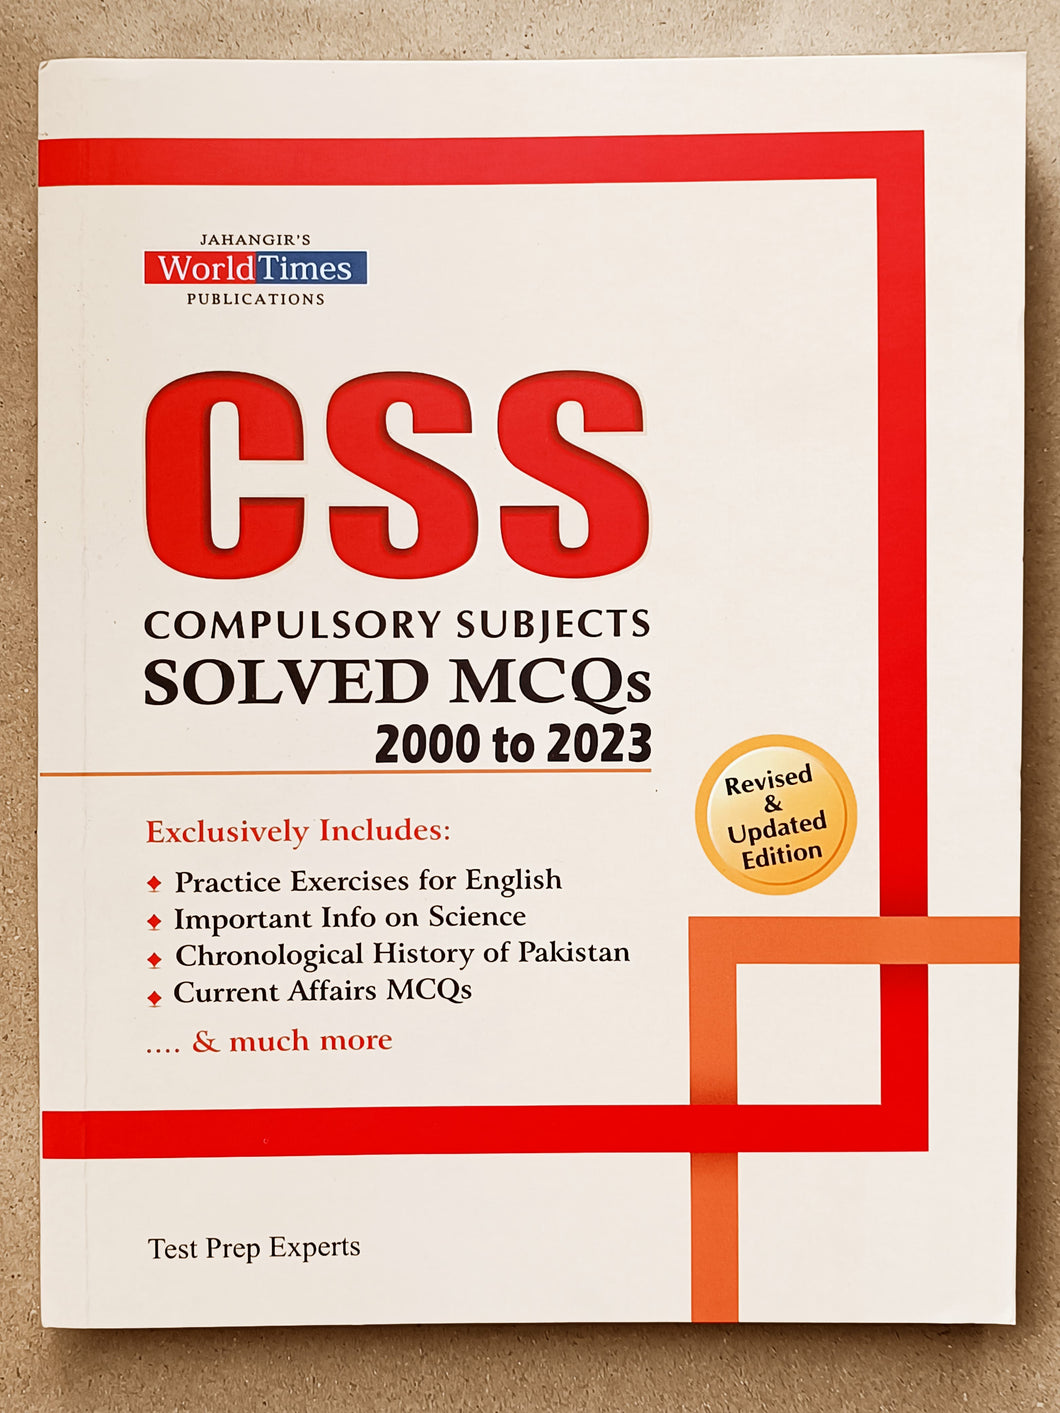 CSS Compulsory Subjects Solved MCQs (2000-2023)